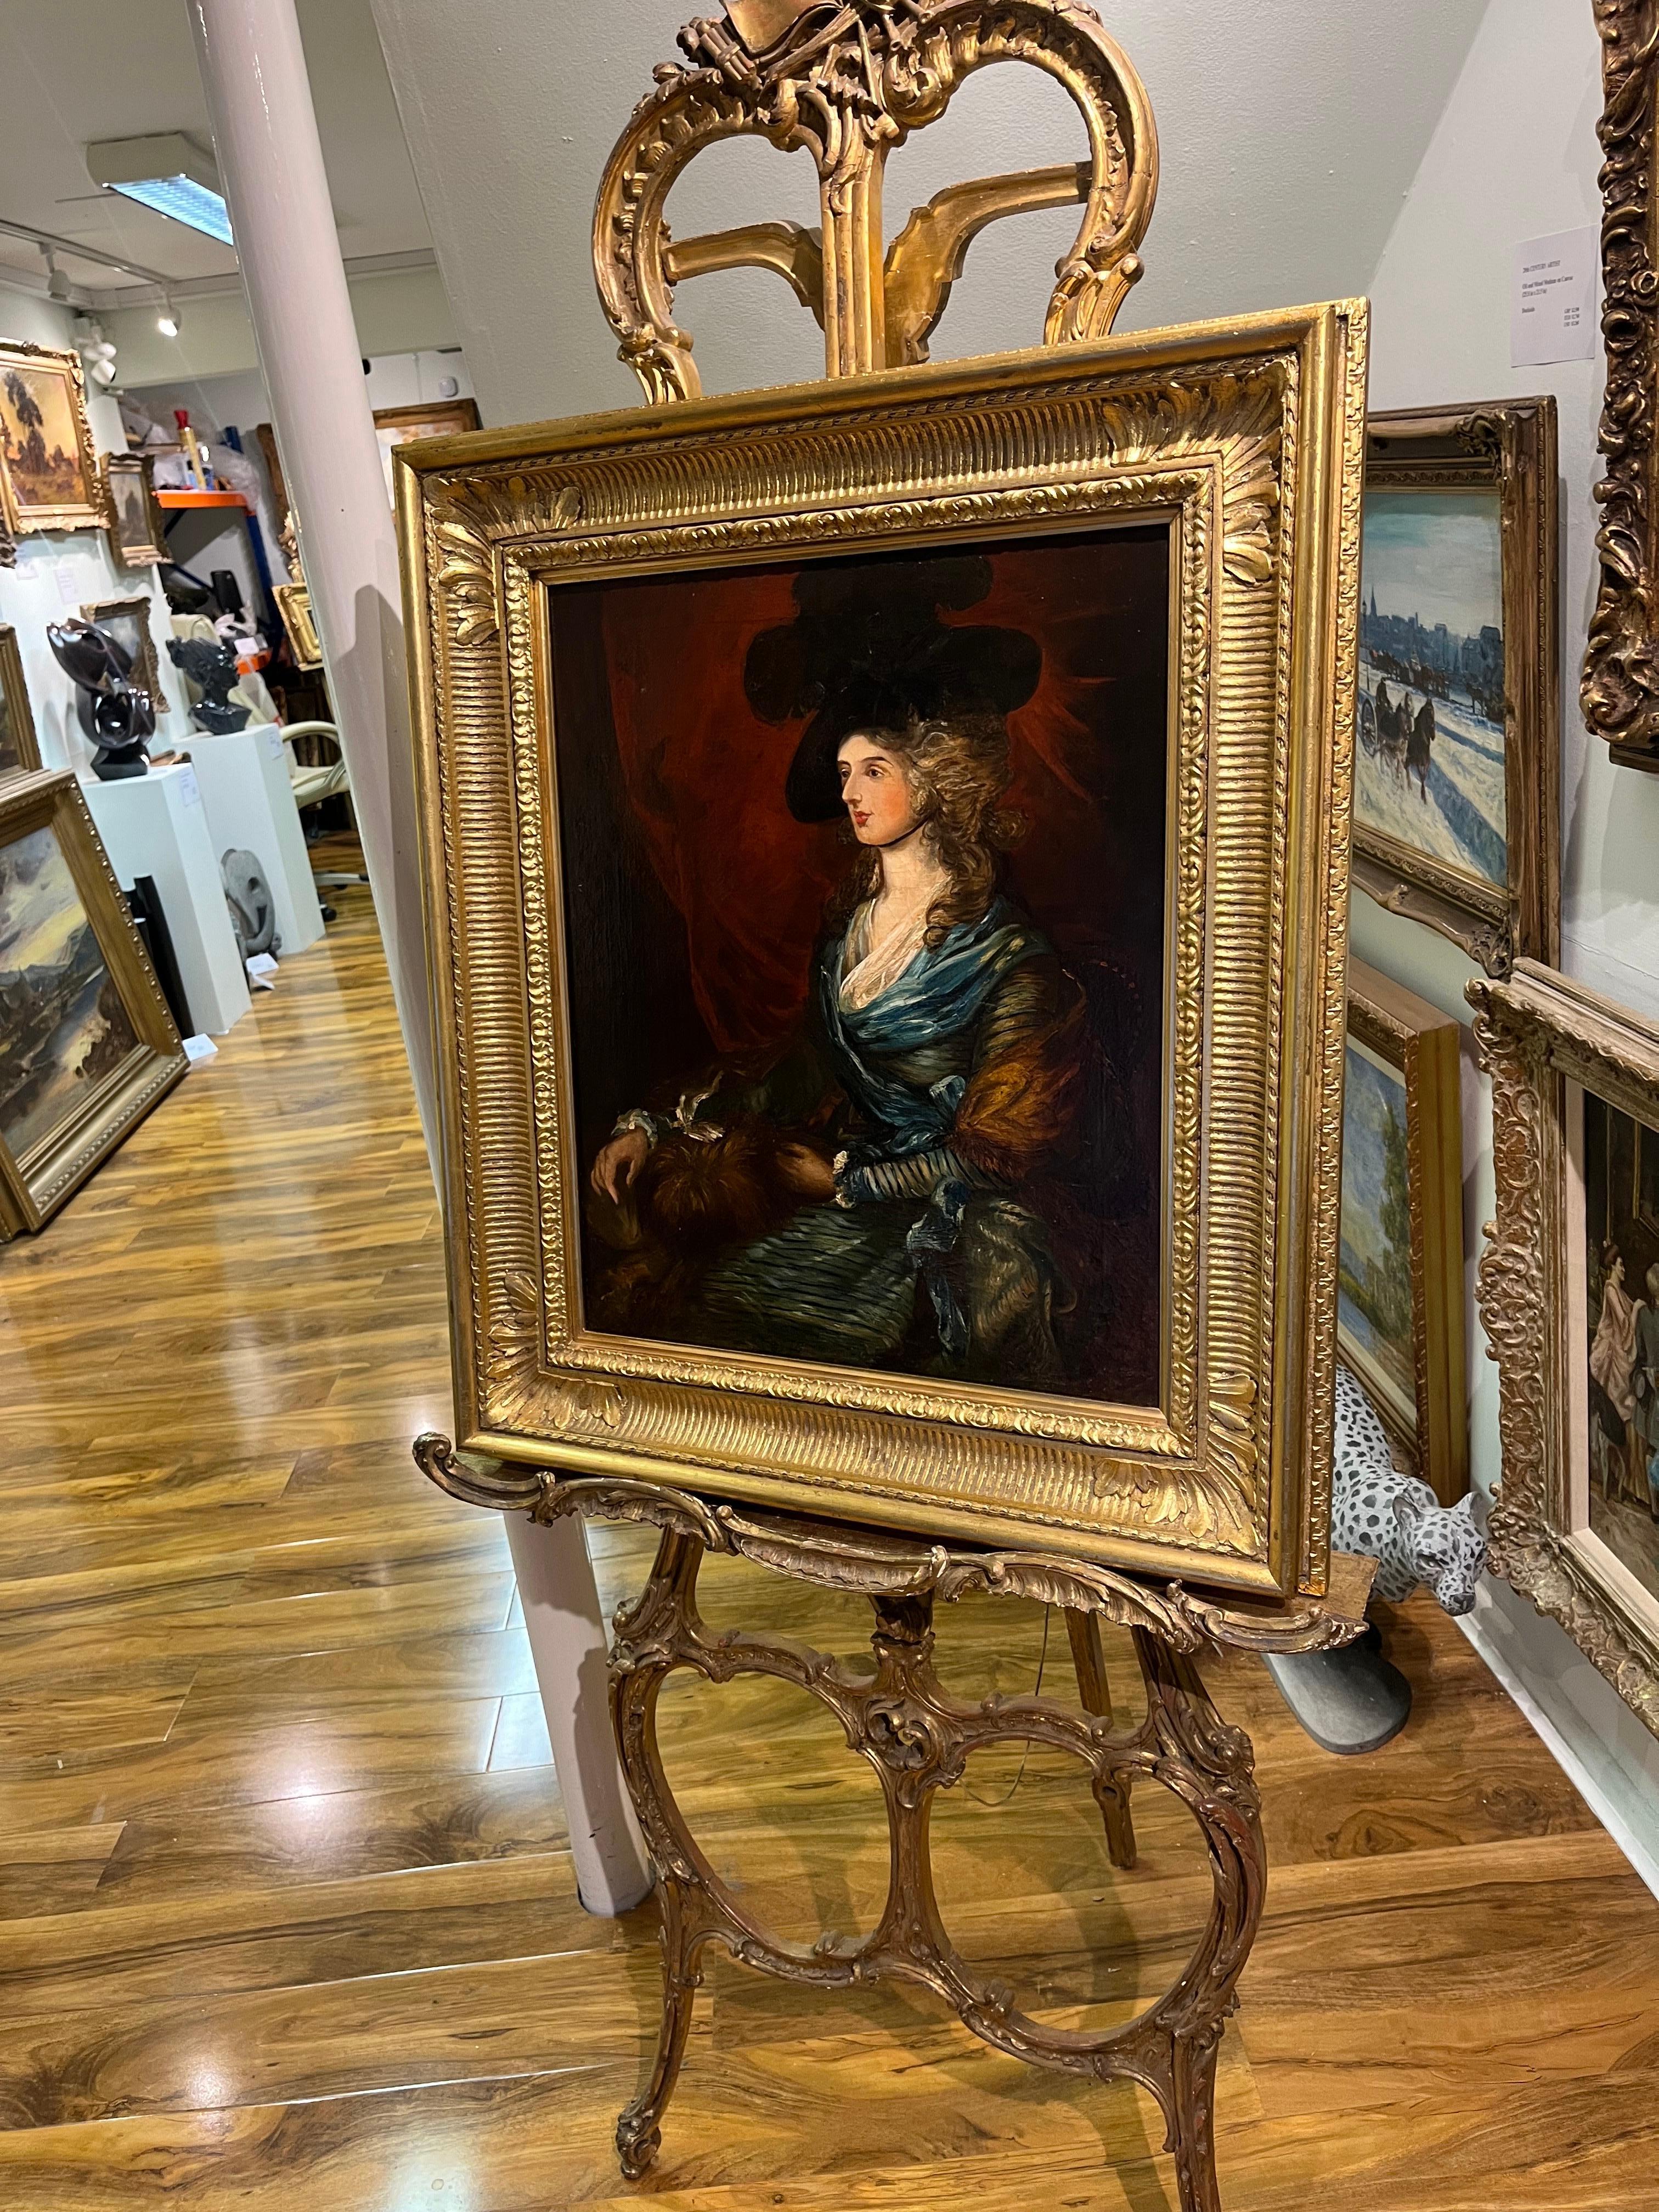 OLD MASTER LATE 18th /EARLY 19th CENTURY CIRCLE of THOMAS GAINSBOROUGH OIL PAINTING

Fine OIL PAINTING Old Master 18th Century R.A artist in a Large 
Gold Gilt Frame

By ? Similar $10,000 Premier Collection

Description

““Museum piece quality